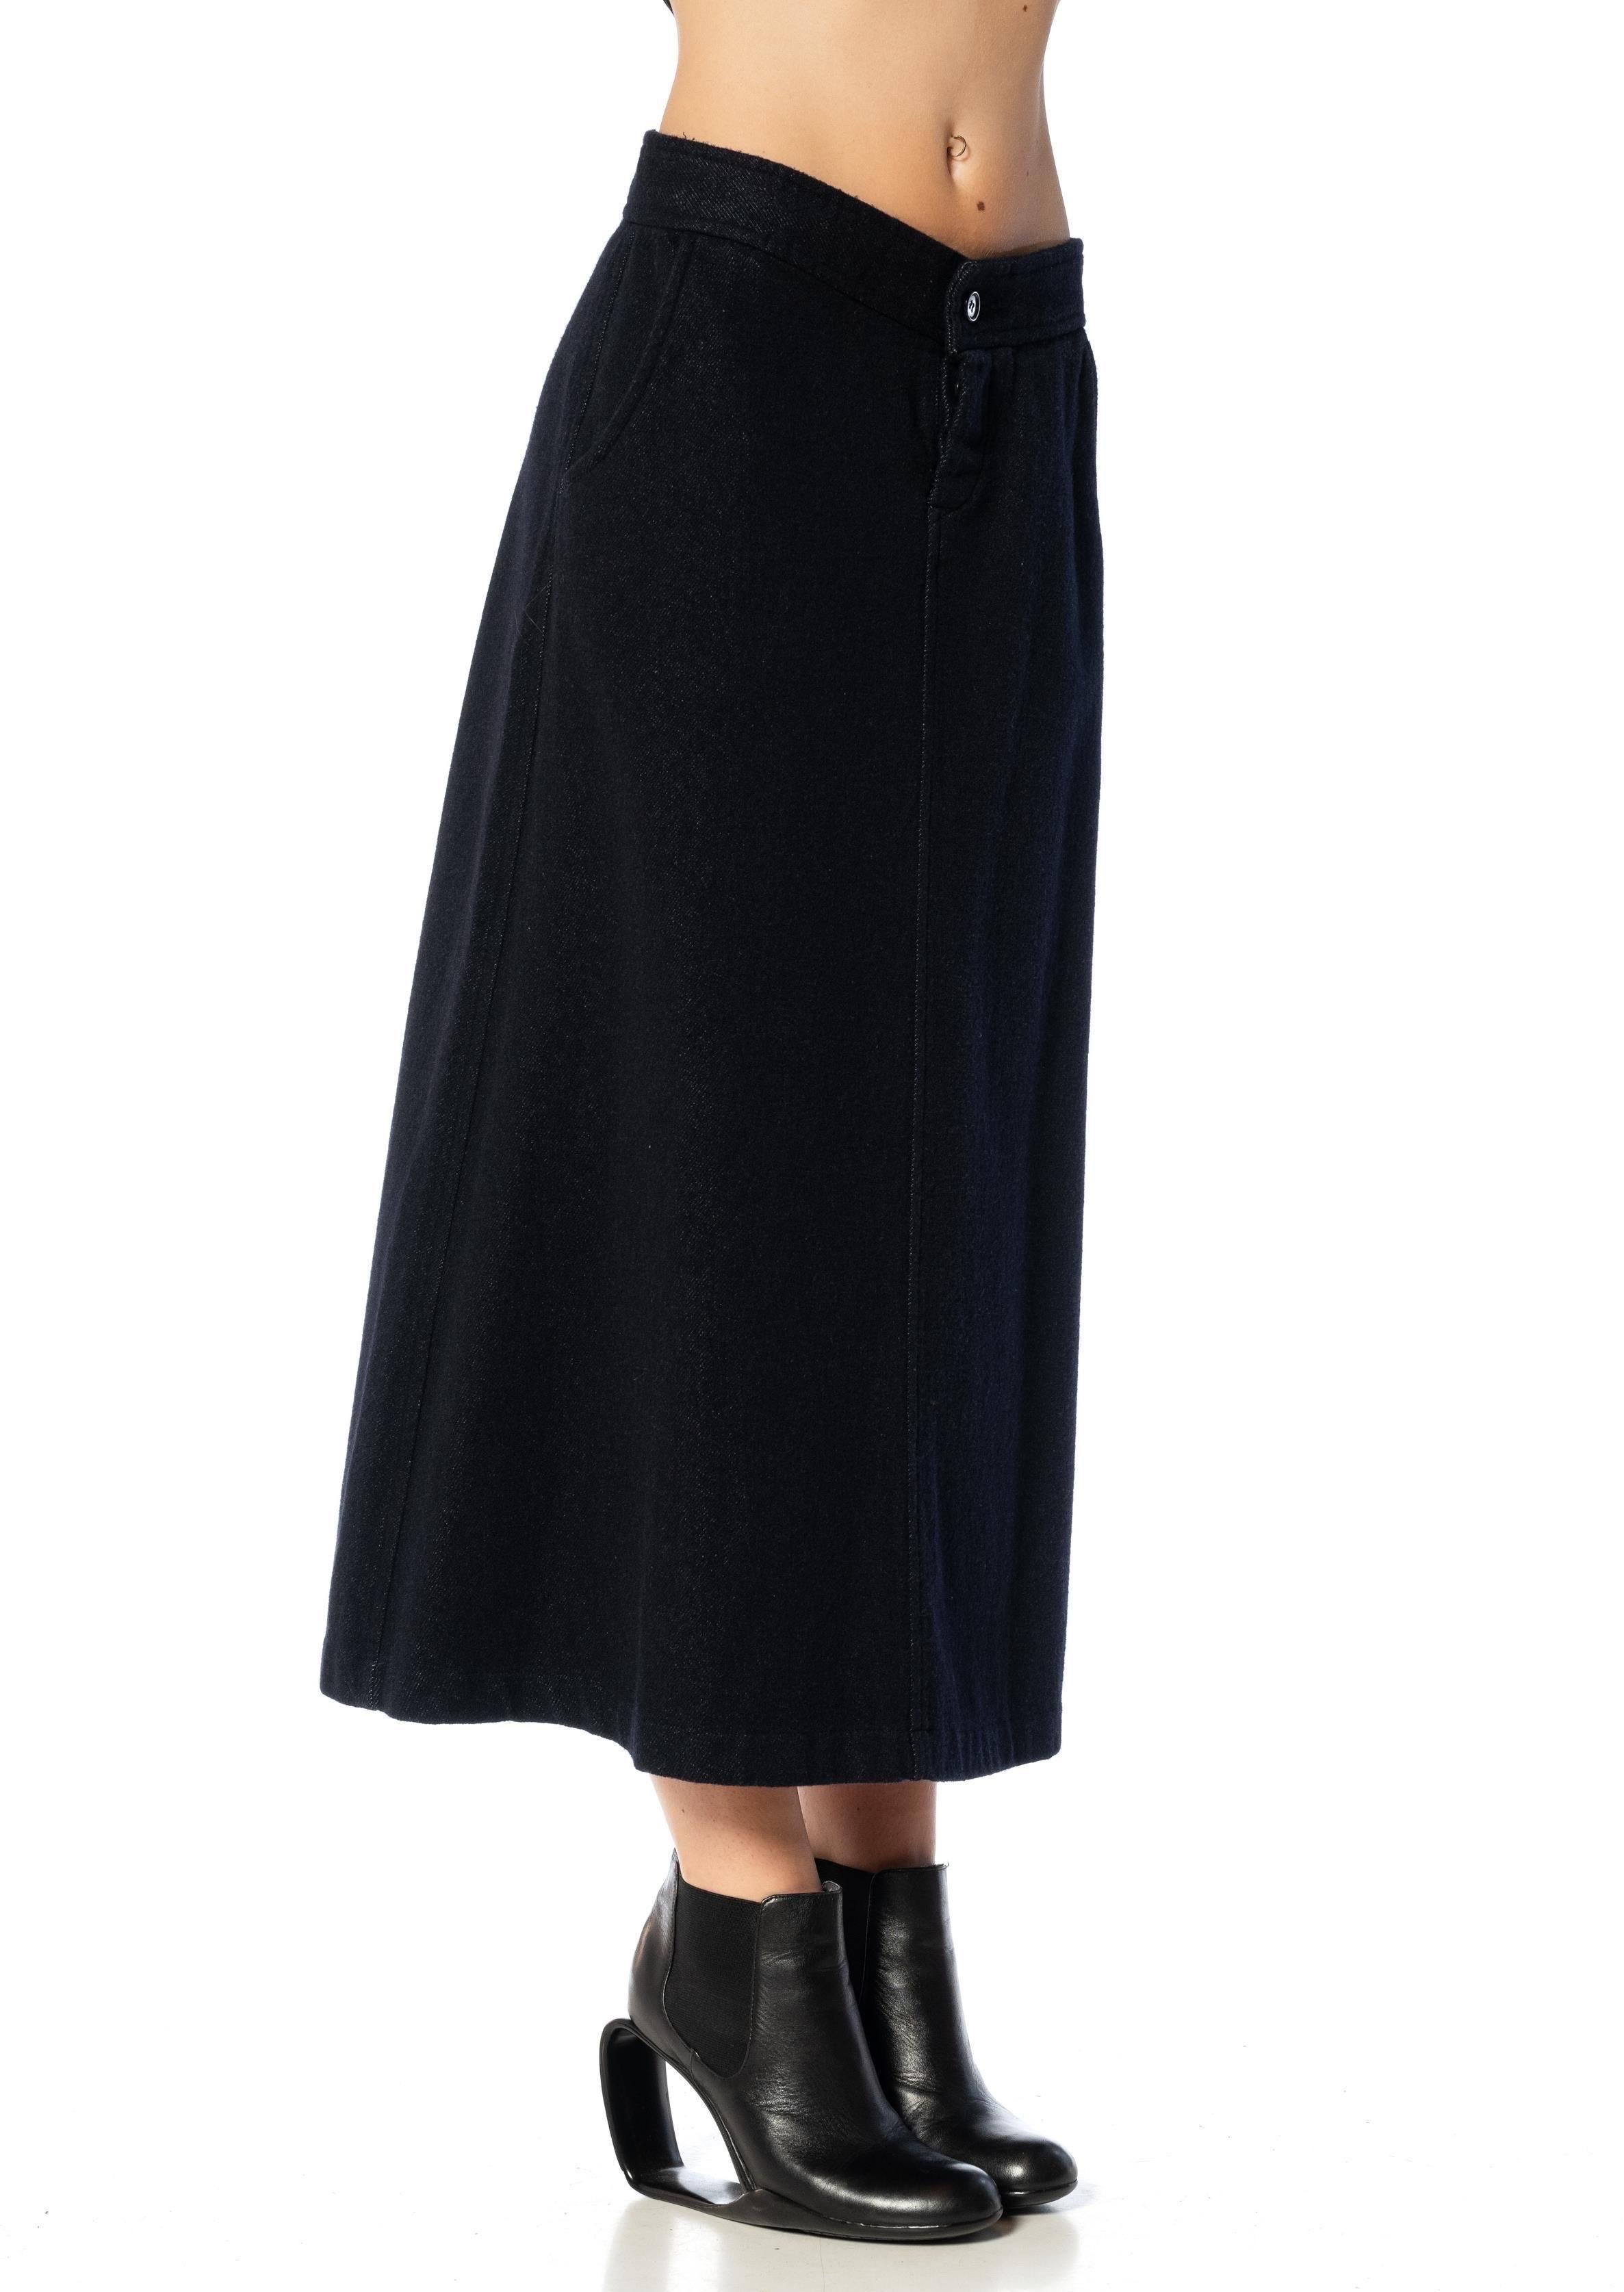 2000S COMME DES GARCONS Wool & Cotton Denim Indigo Over-Dyed Low Hip Skirt For Sale 1